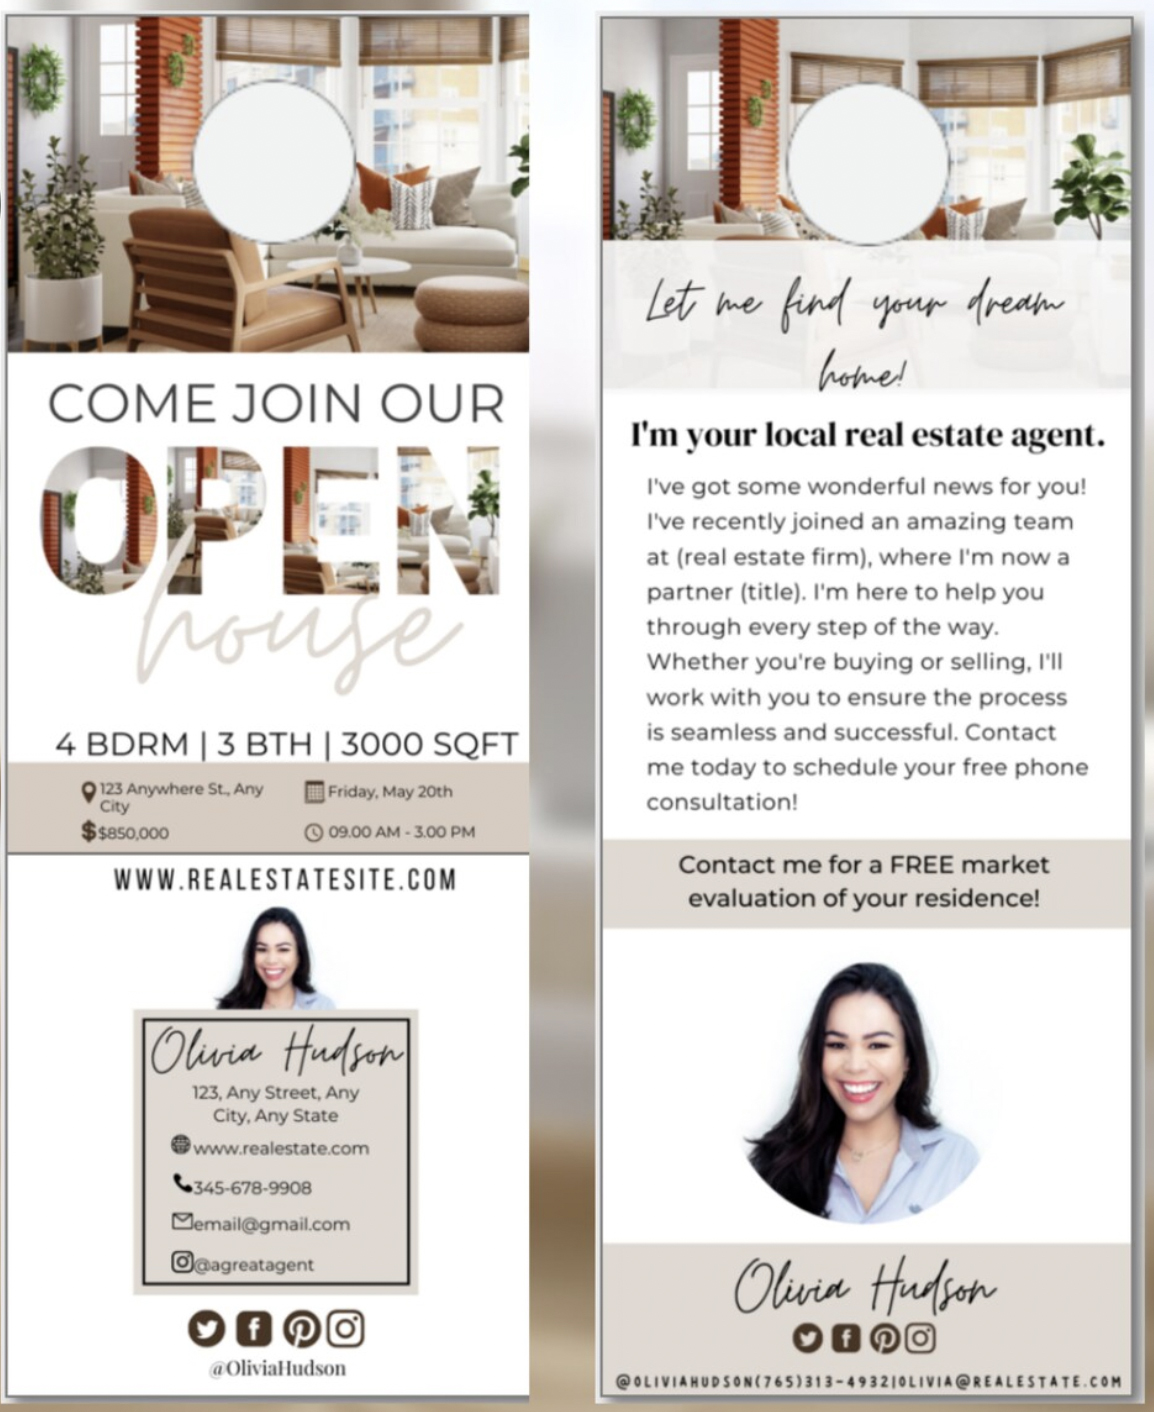 Door hanger real estate agent template titled "come join our open house".